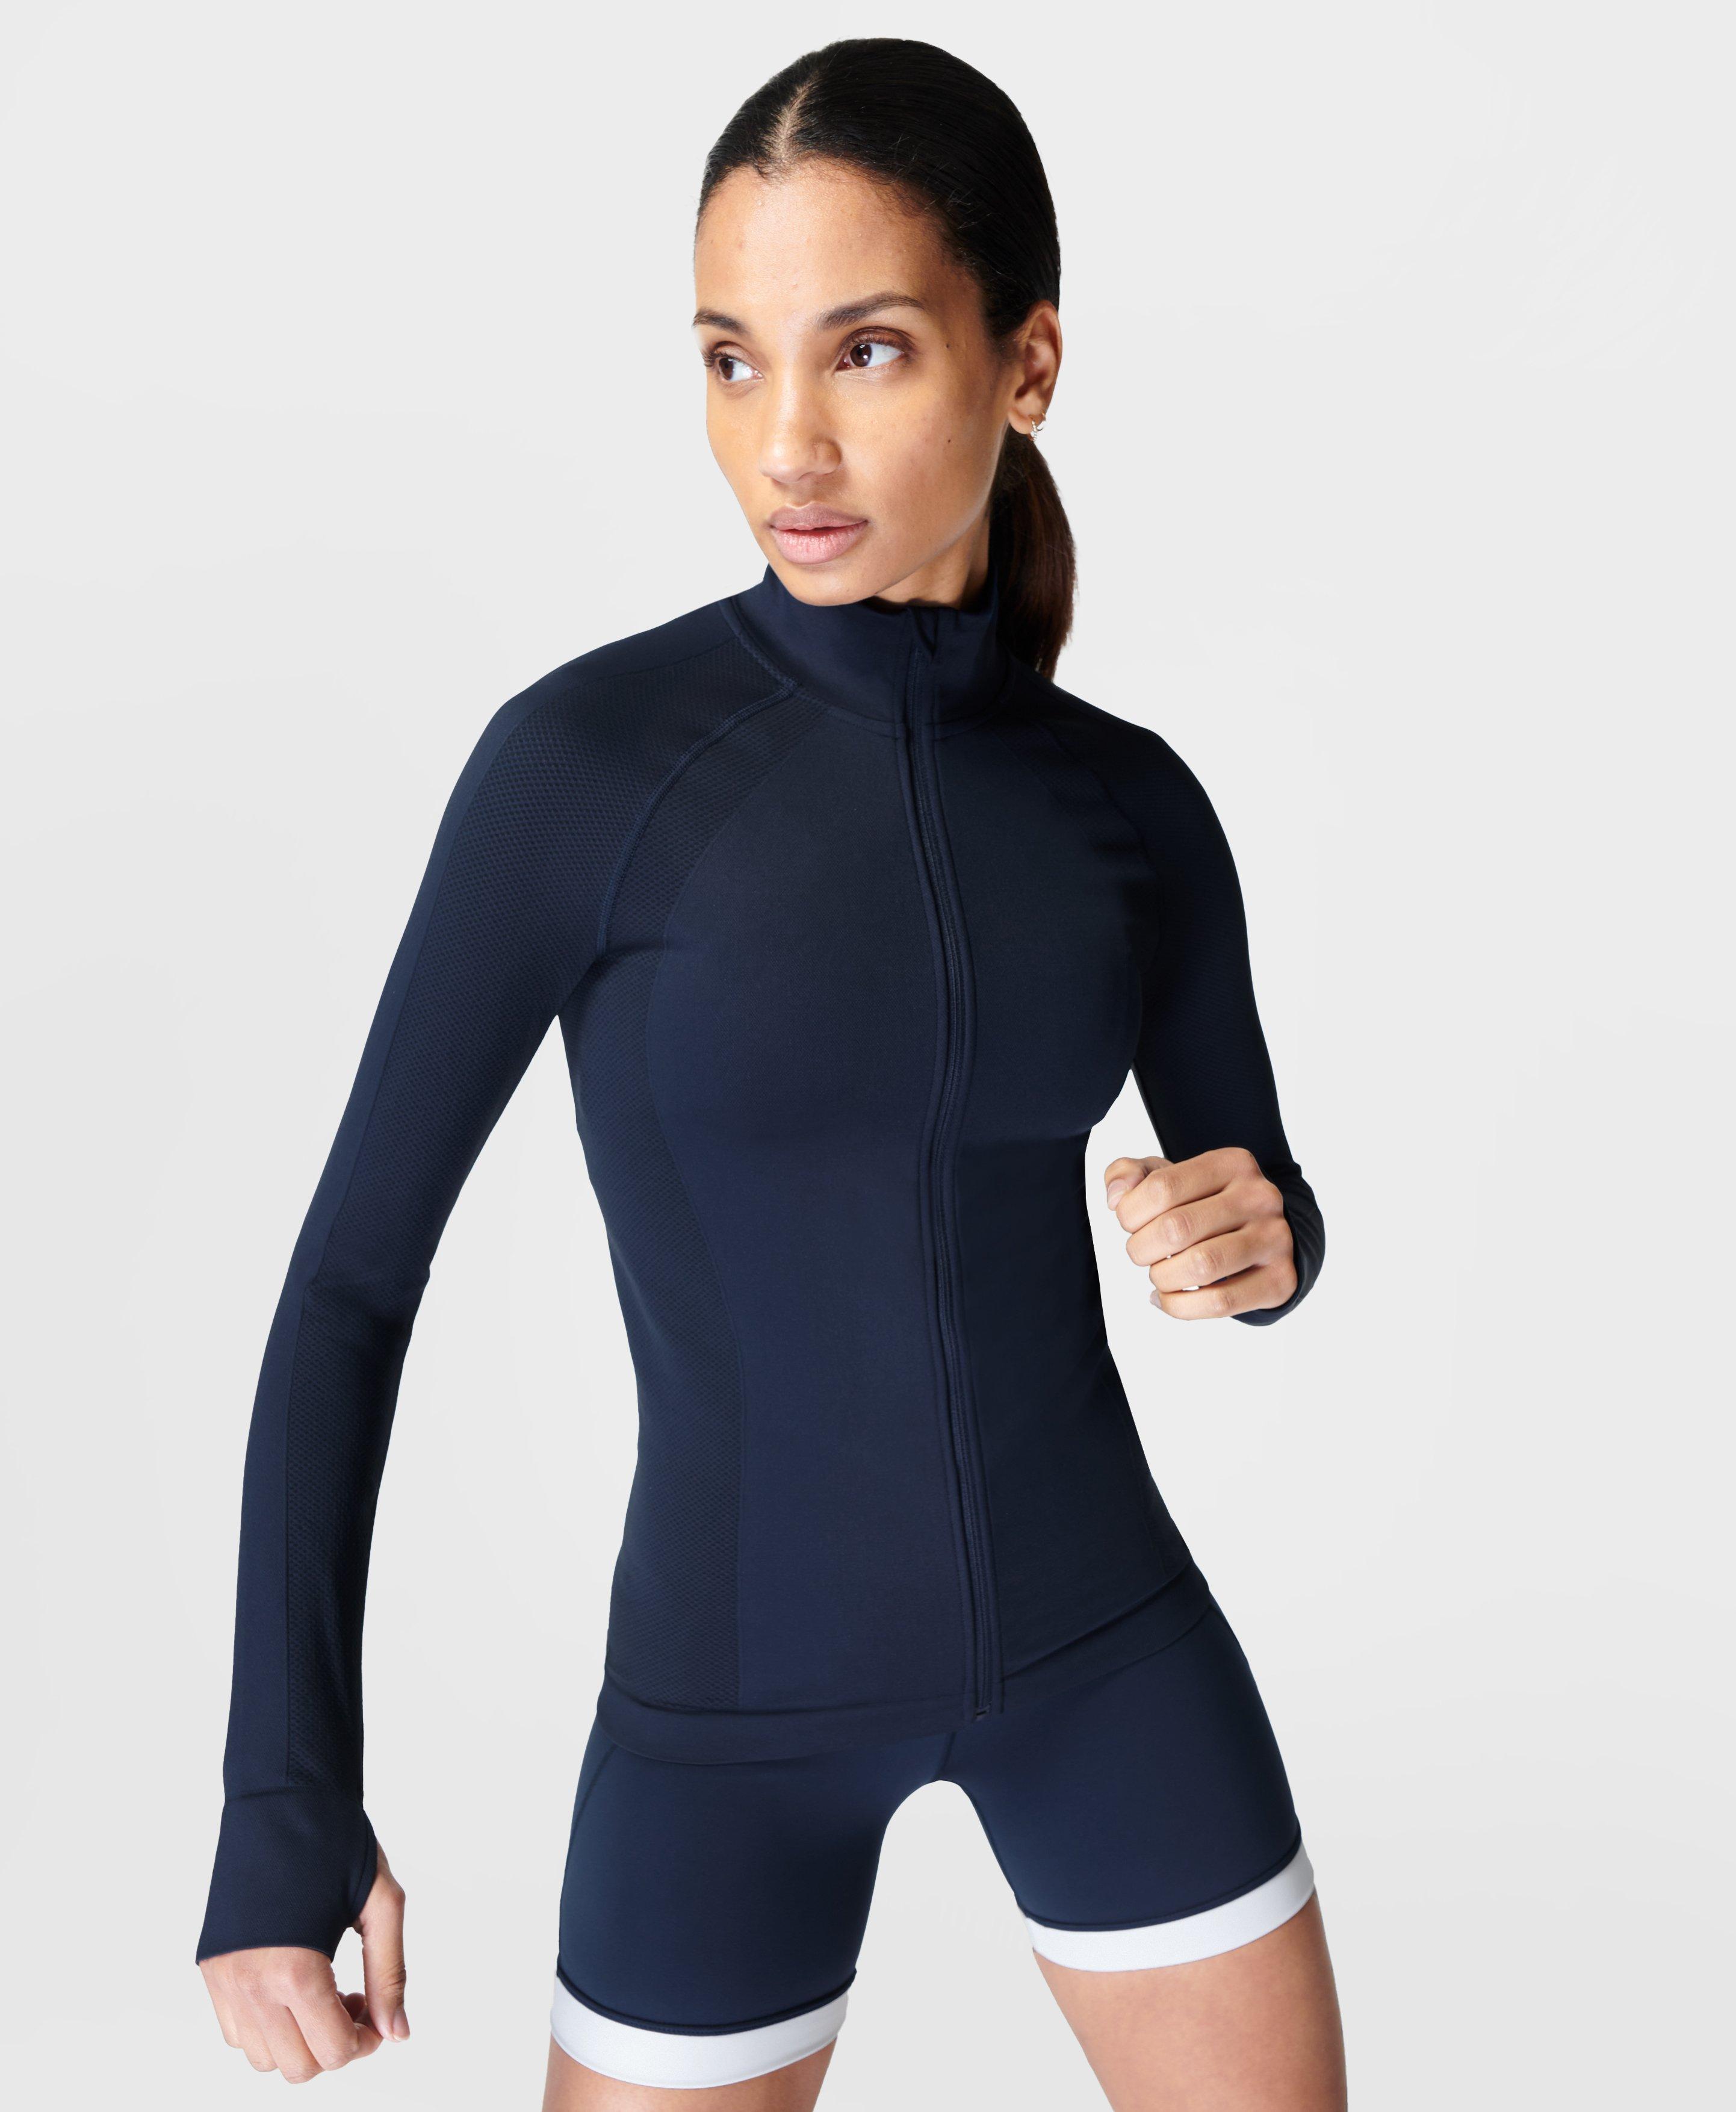 Athlete Doubleweight Seamless Gym Zip Up - Navy Blue | Women's Jumpers ...